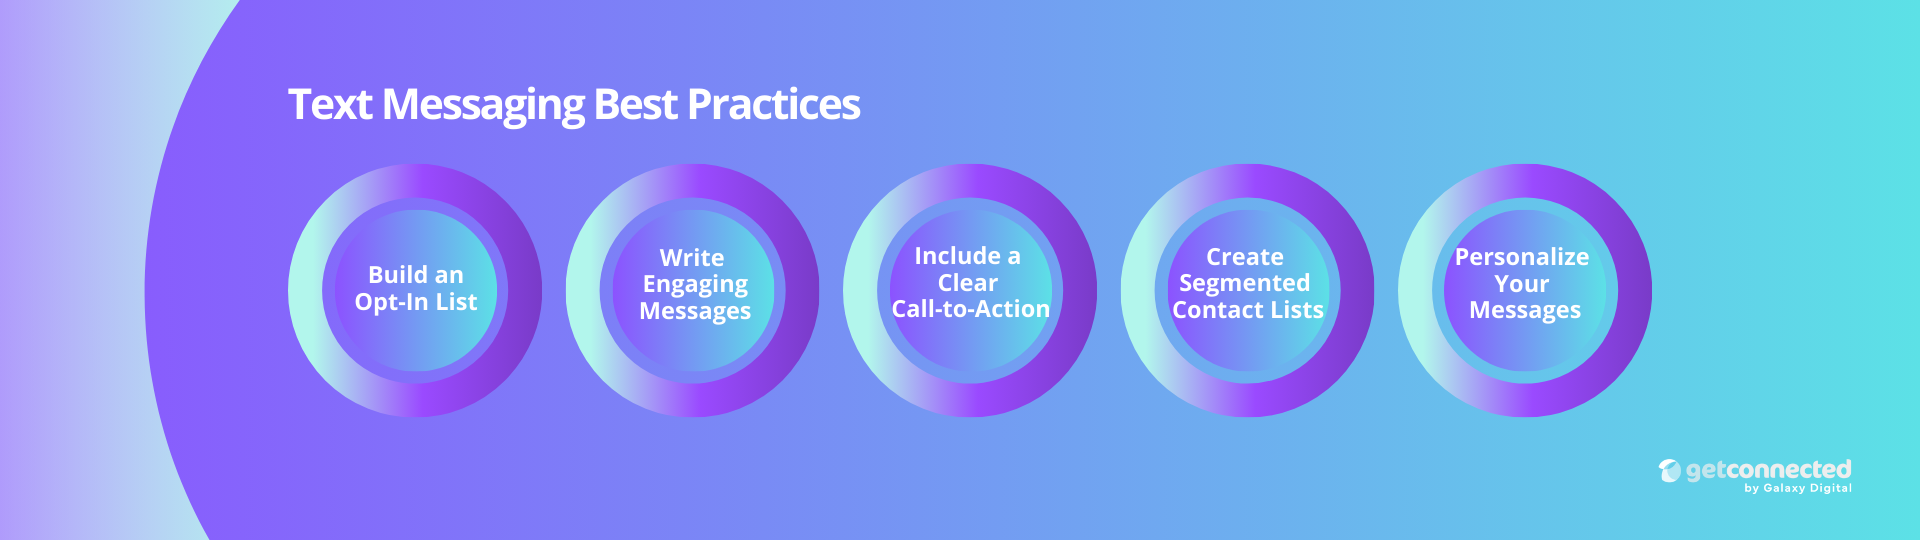 Text Messaging Best Practices for Nonprofits 